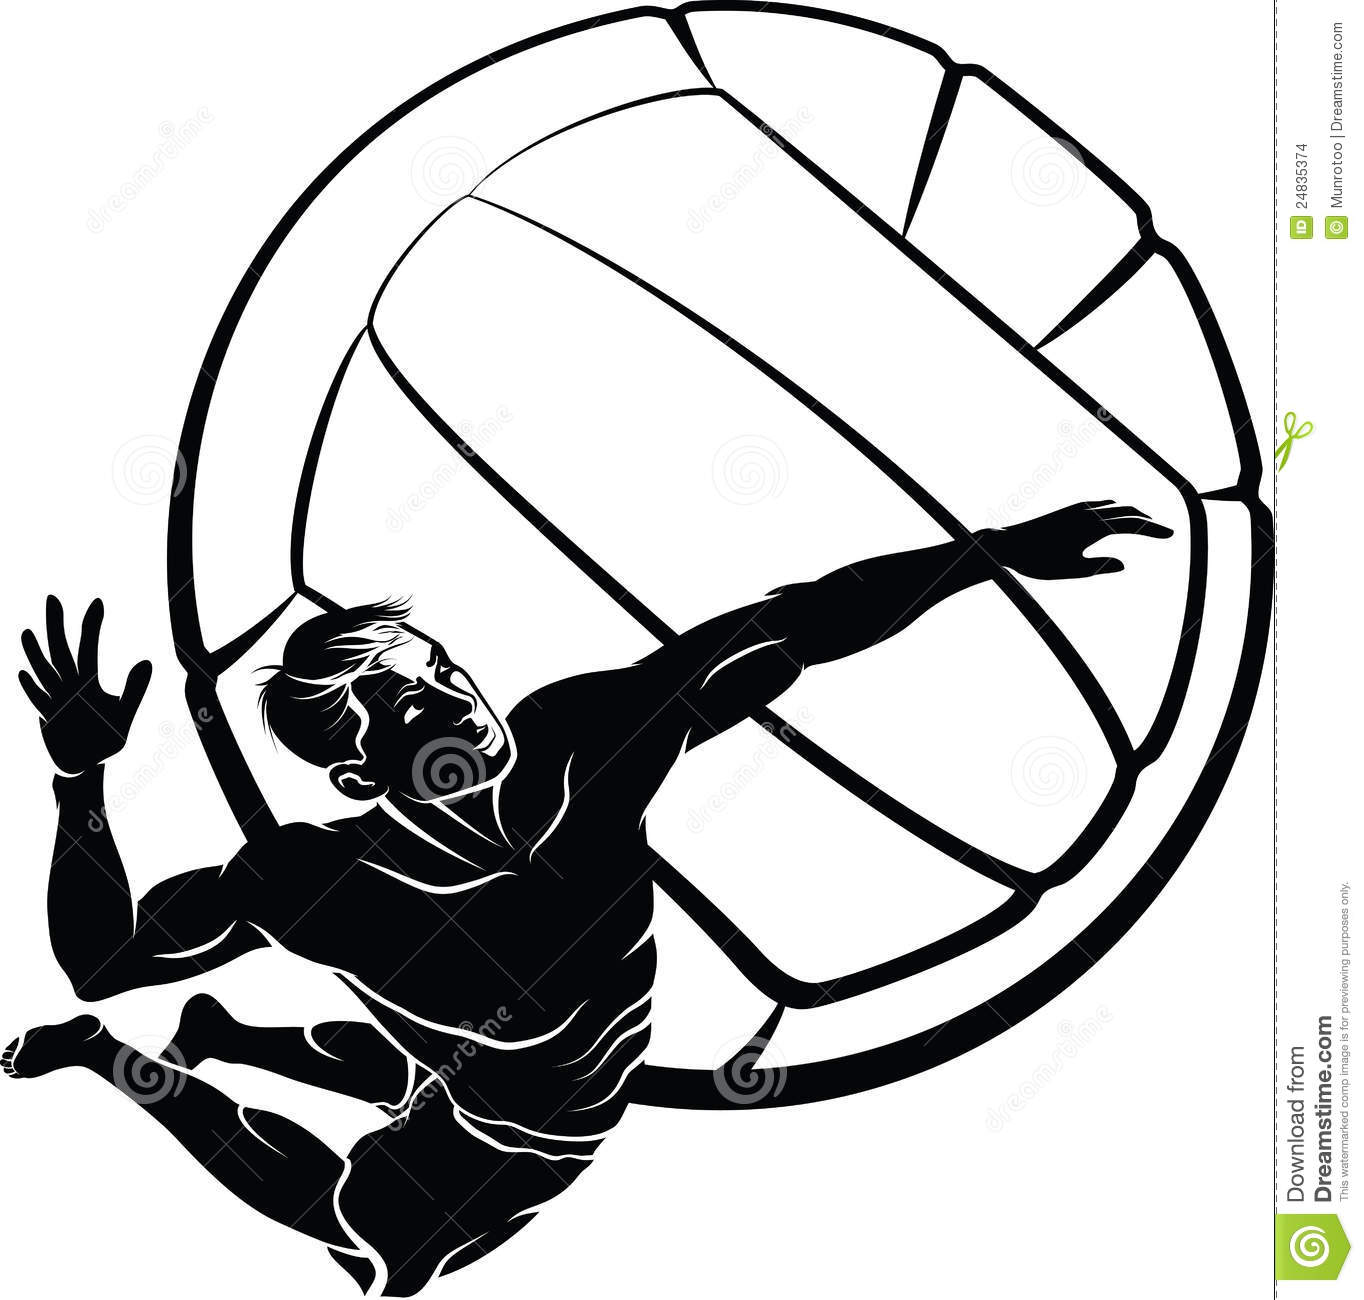 Volleyball Spike Clipart   Clipart Panda   Free Clipart Images